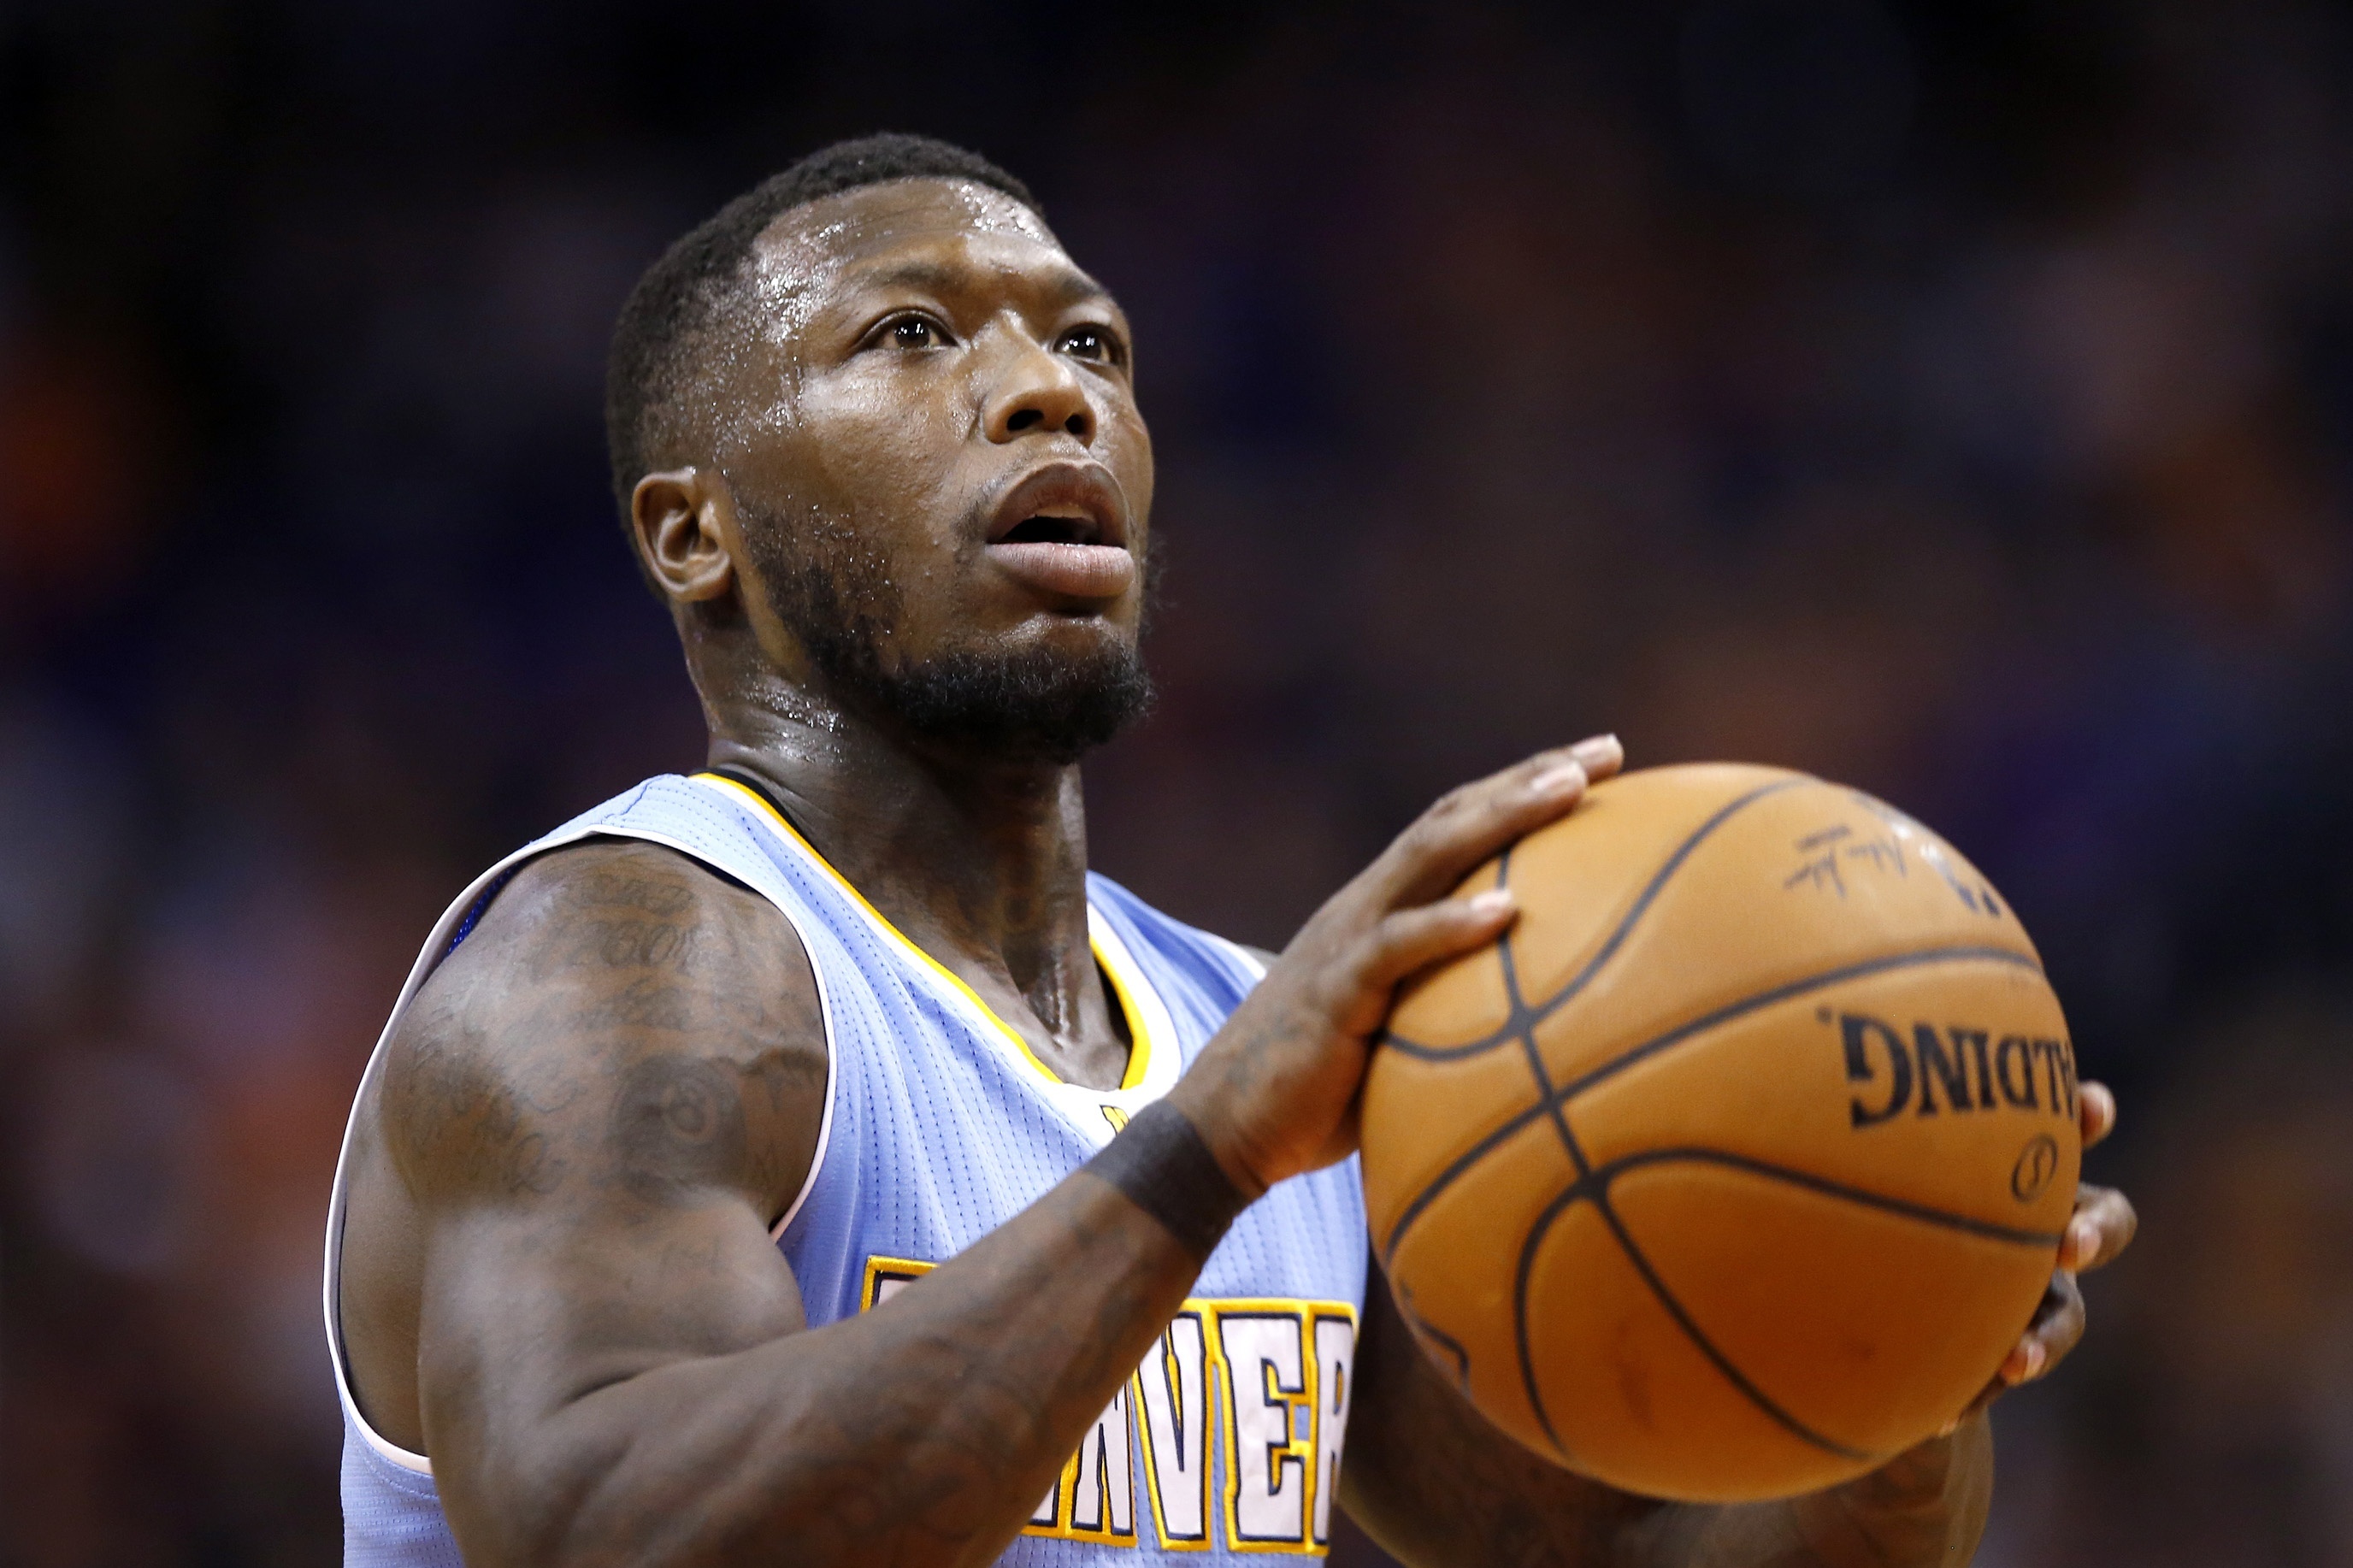 Nate Robinson: 'I'm One of the Greatest Short Guys to Ever Play